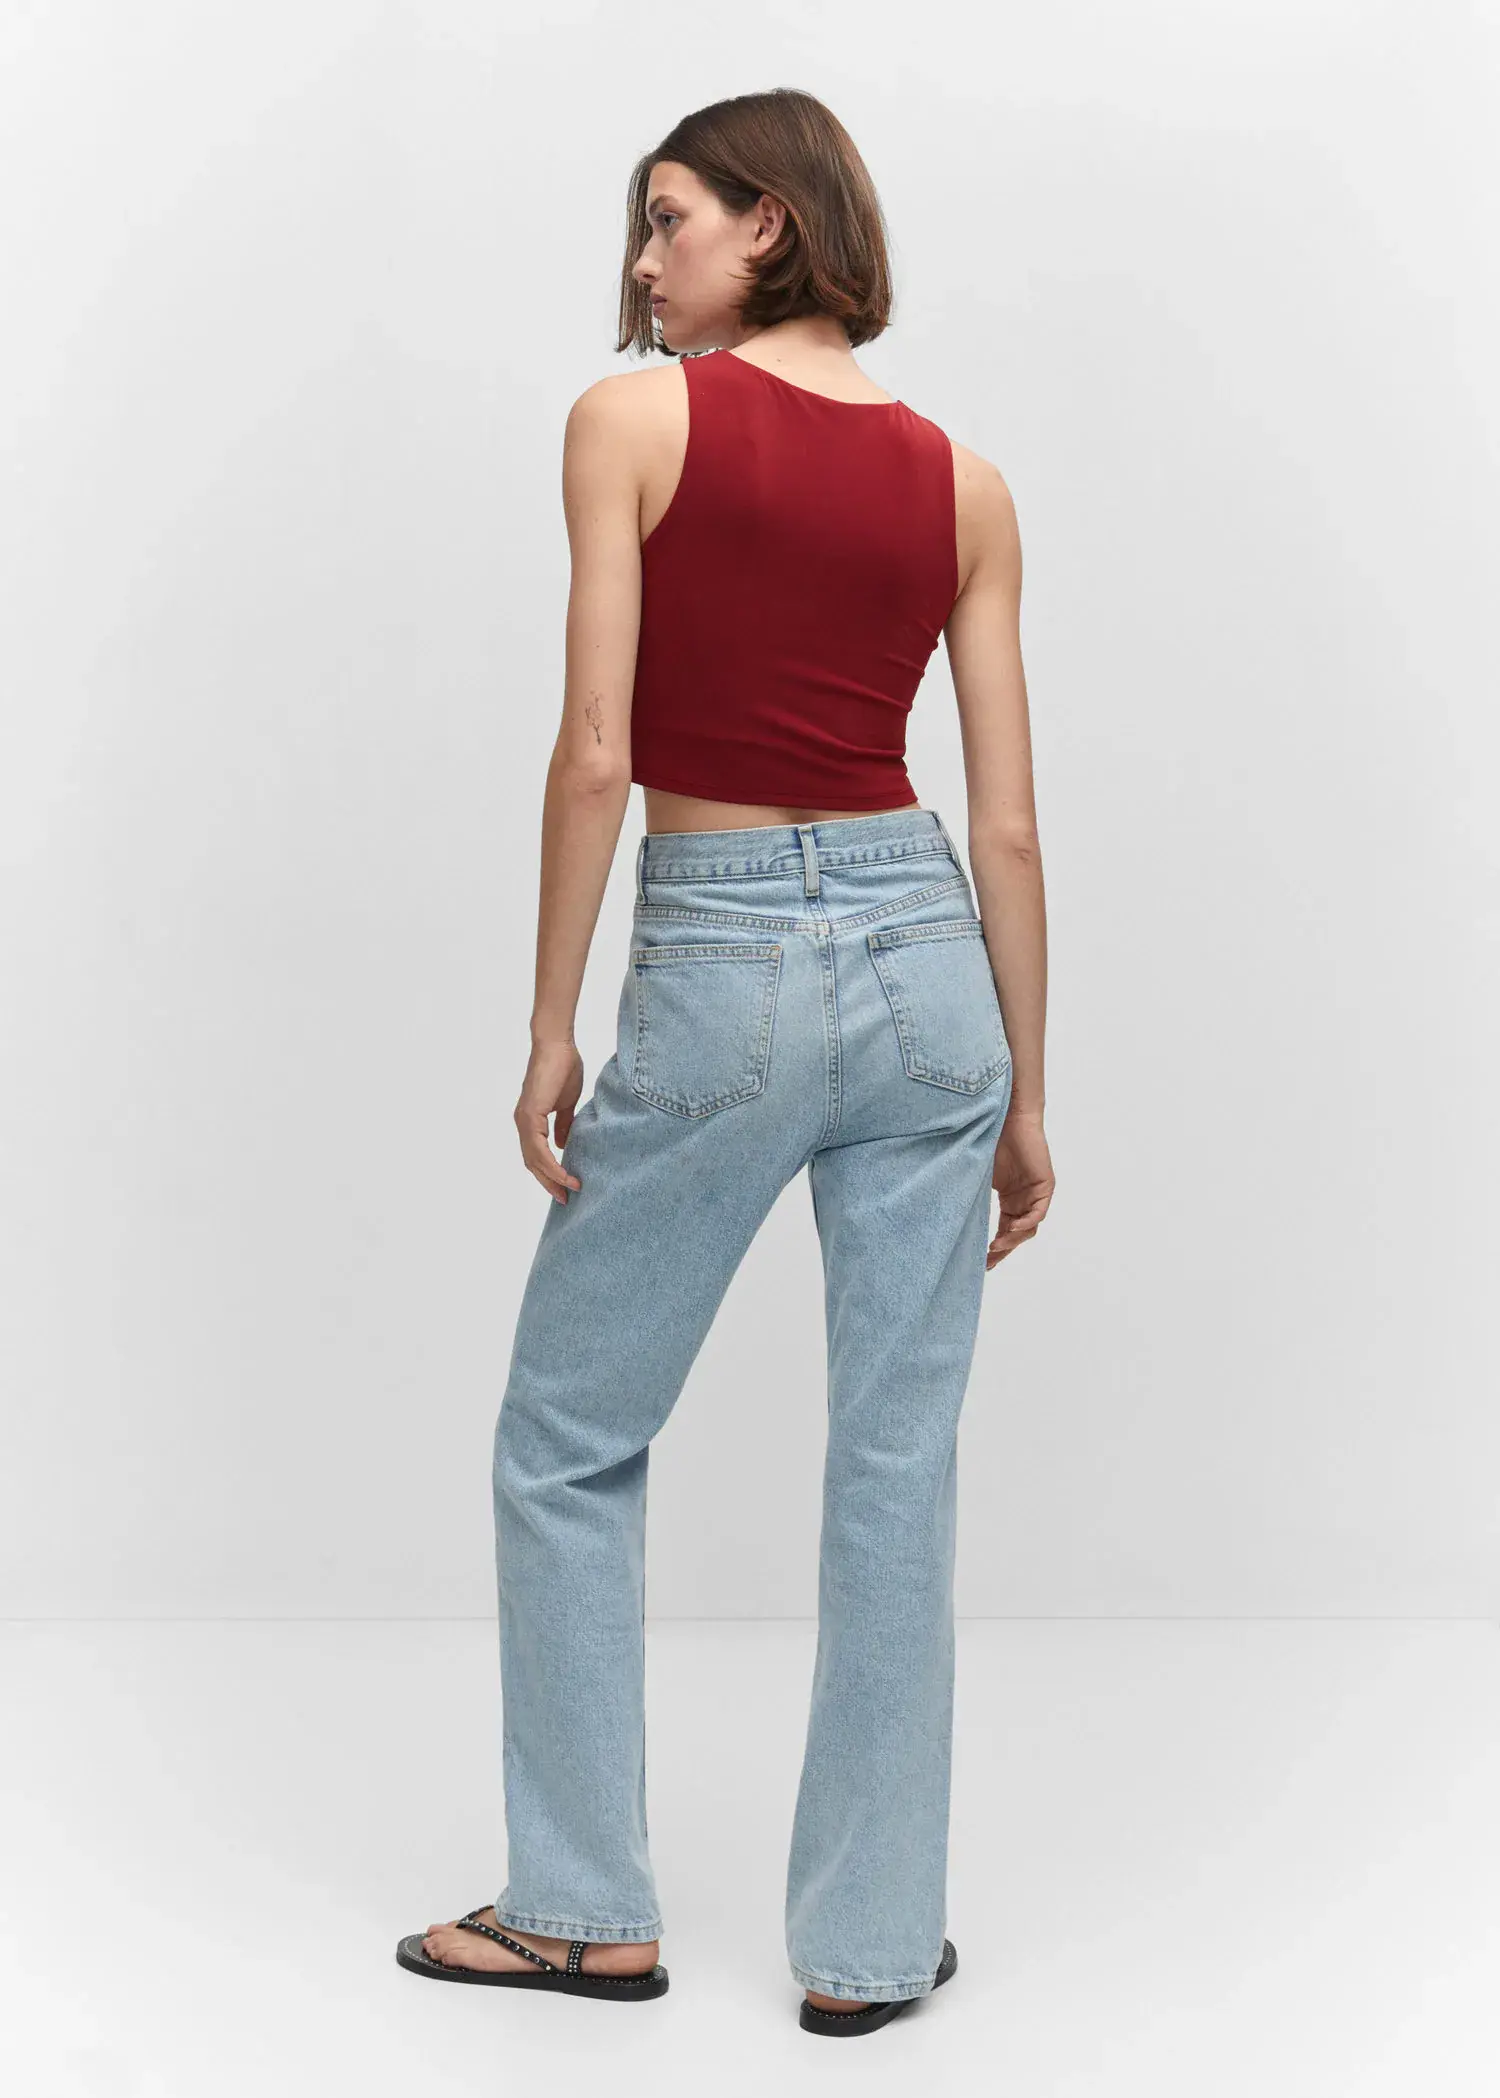 Mango Crop top halter neck. a woman in a red top and light blue jeans. 